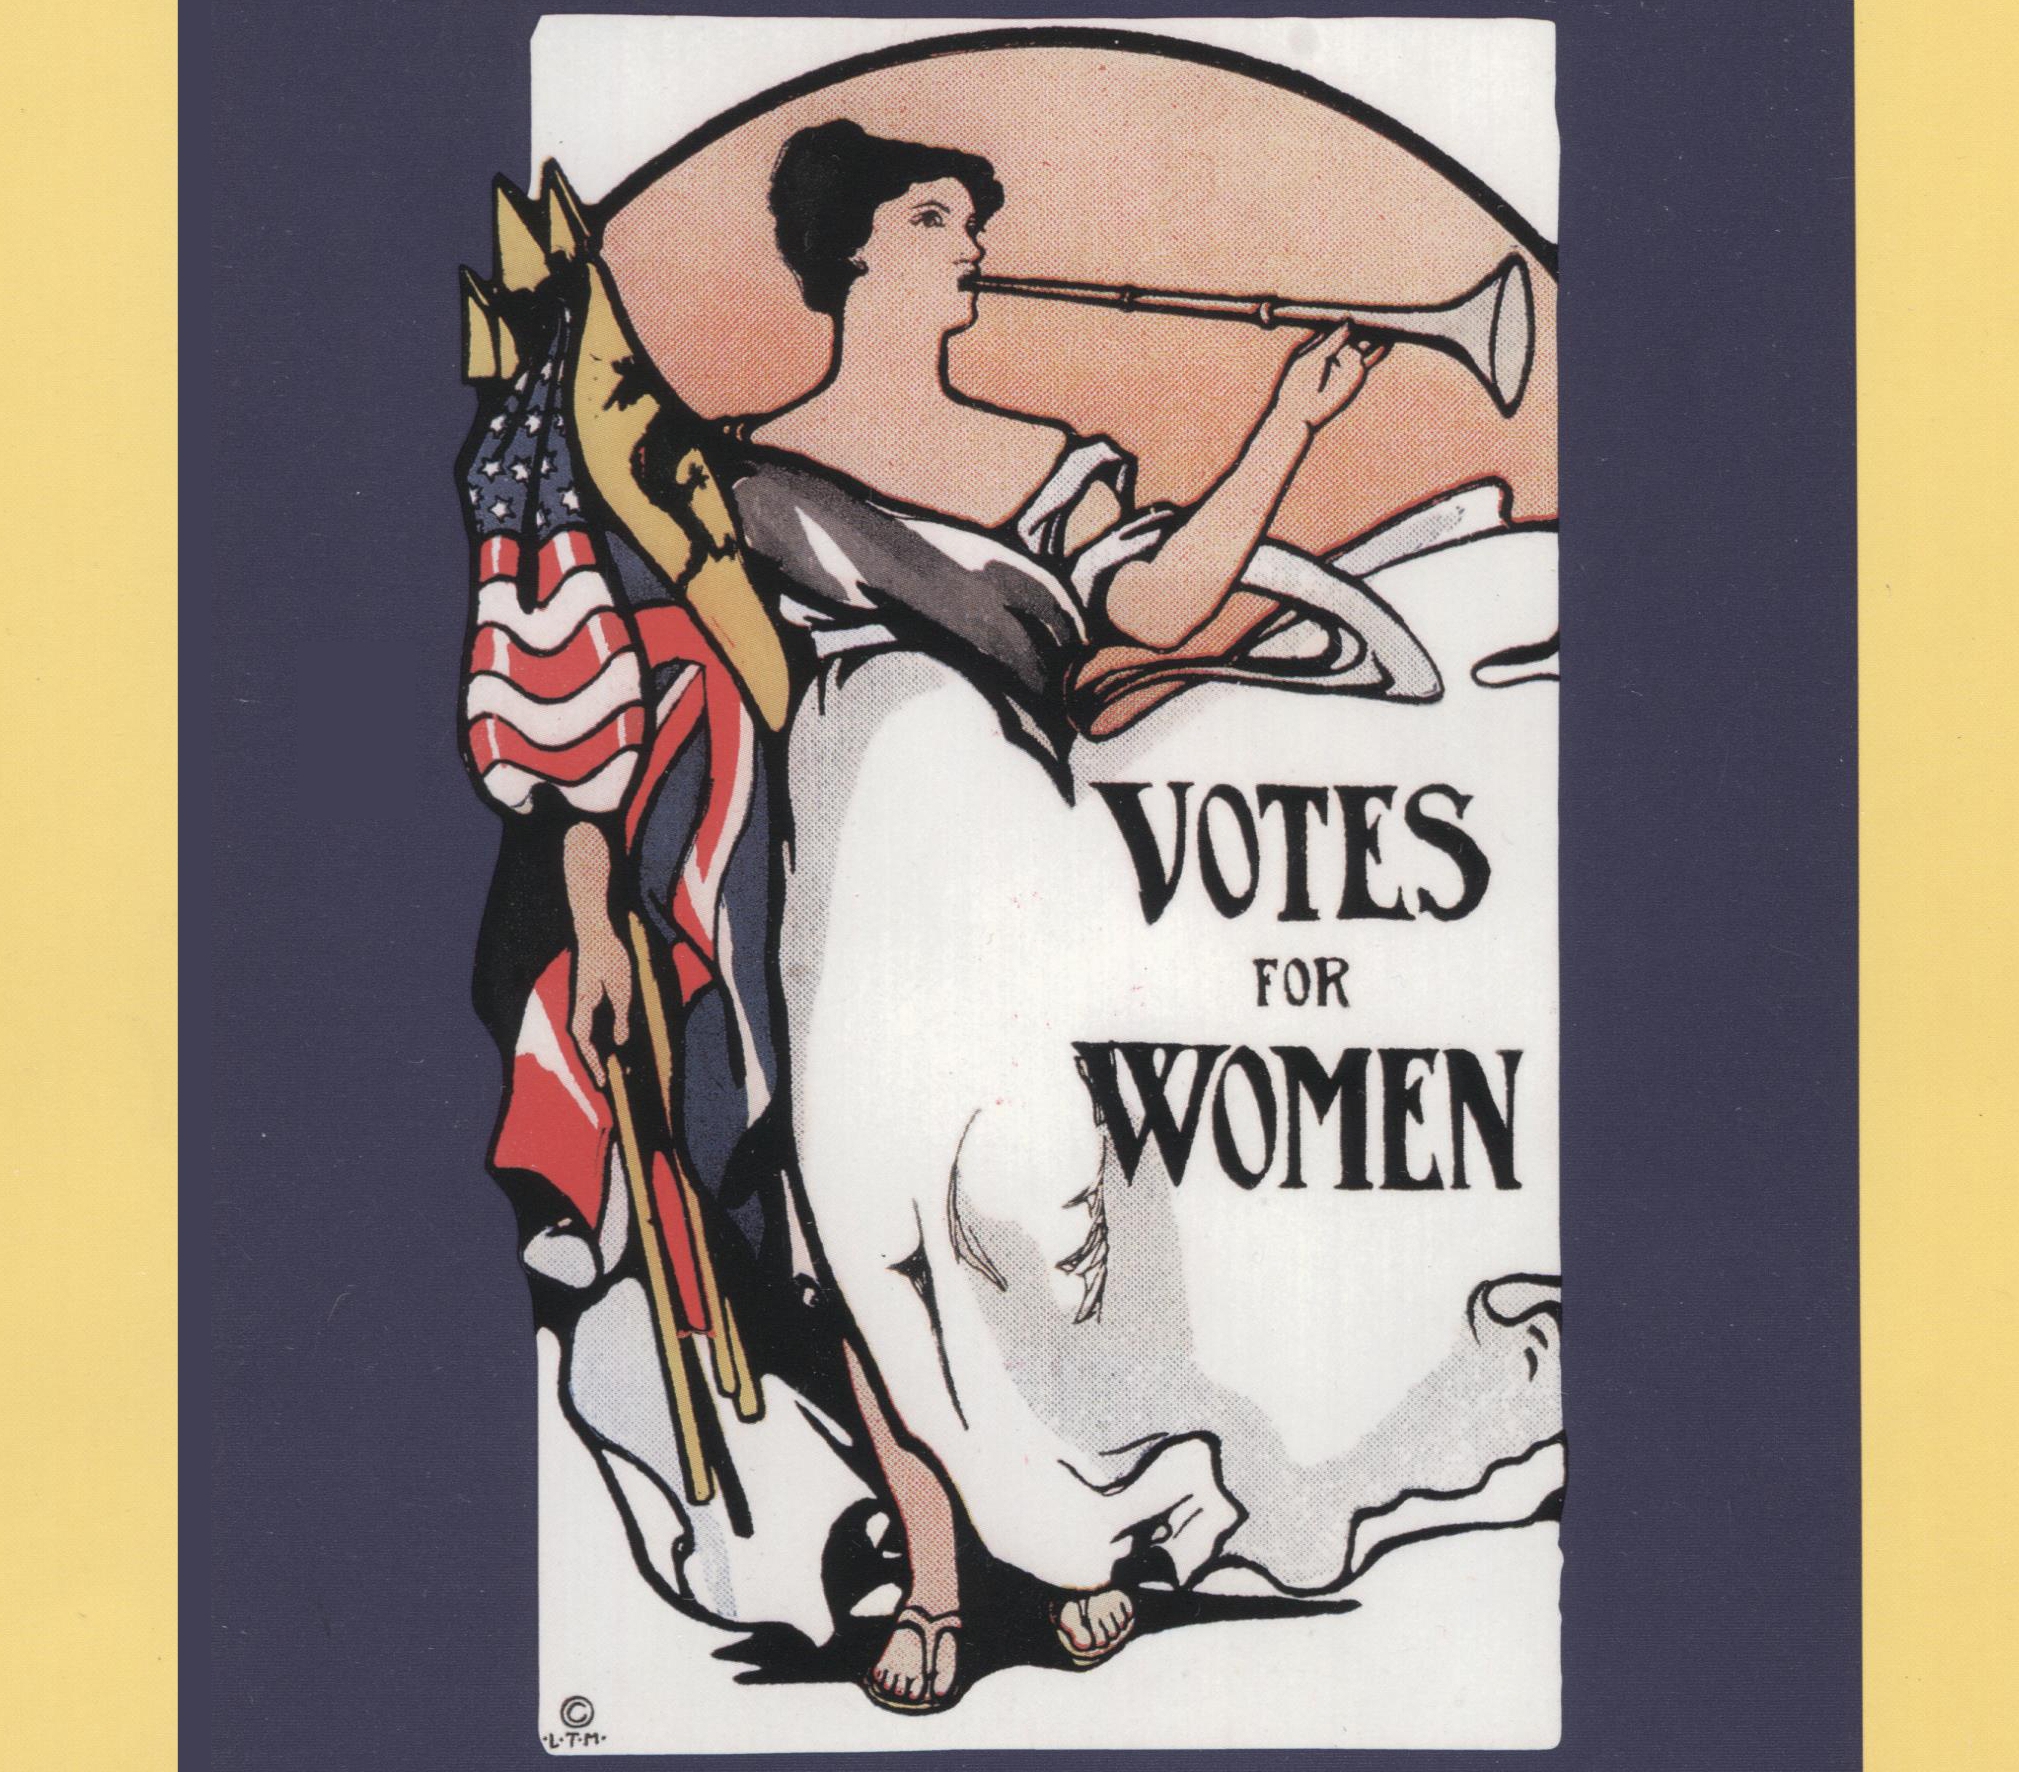 VOTES FOR WOMEN ~ UNFINISHED BUSINESS